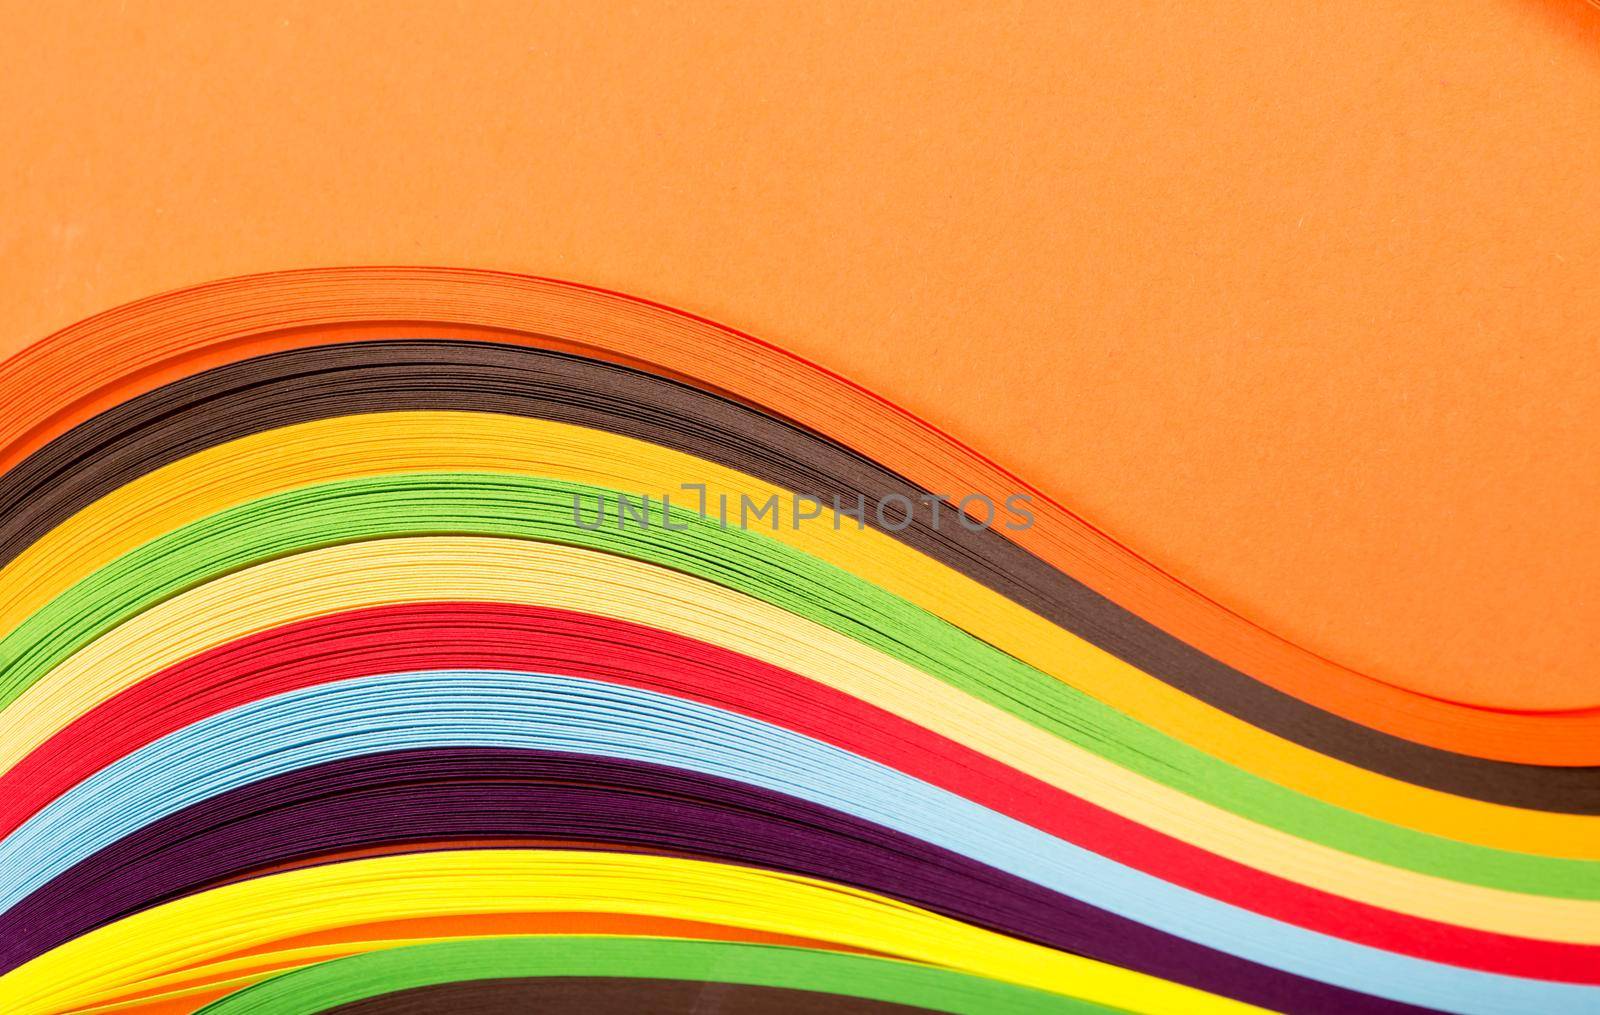 Colored paper, cross section, background stacked in wedges. by aprilphoto